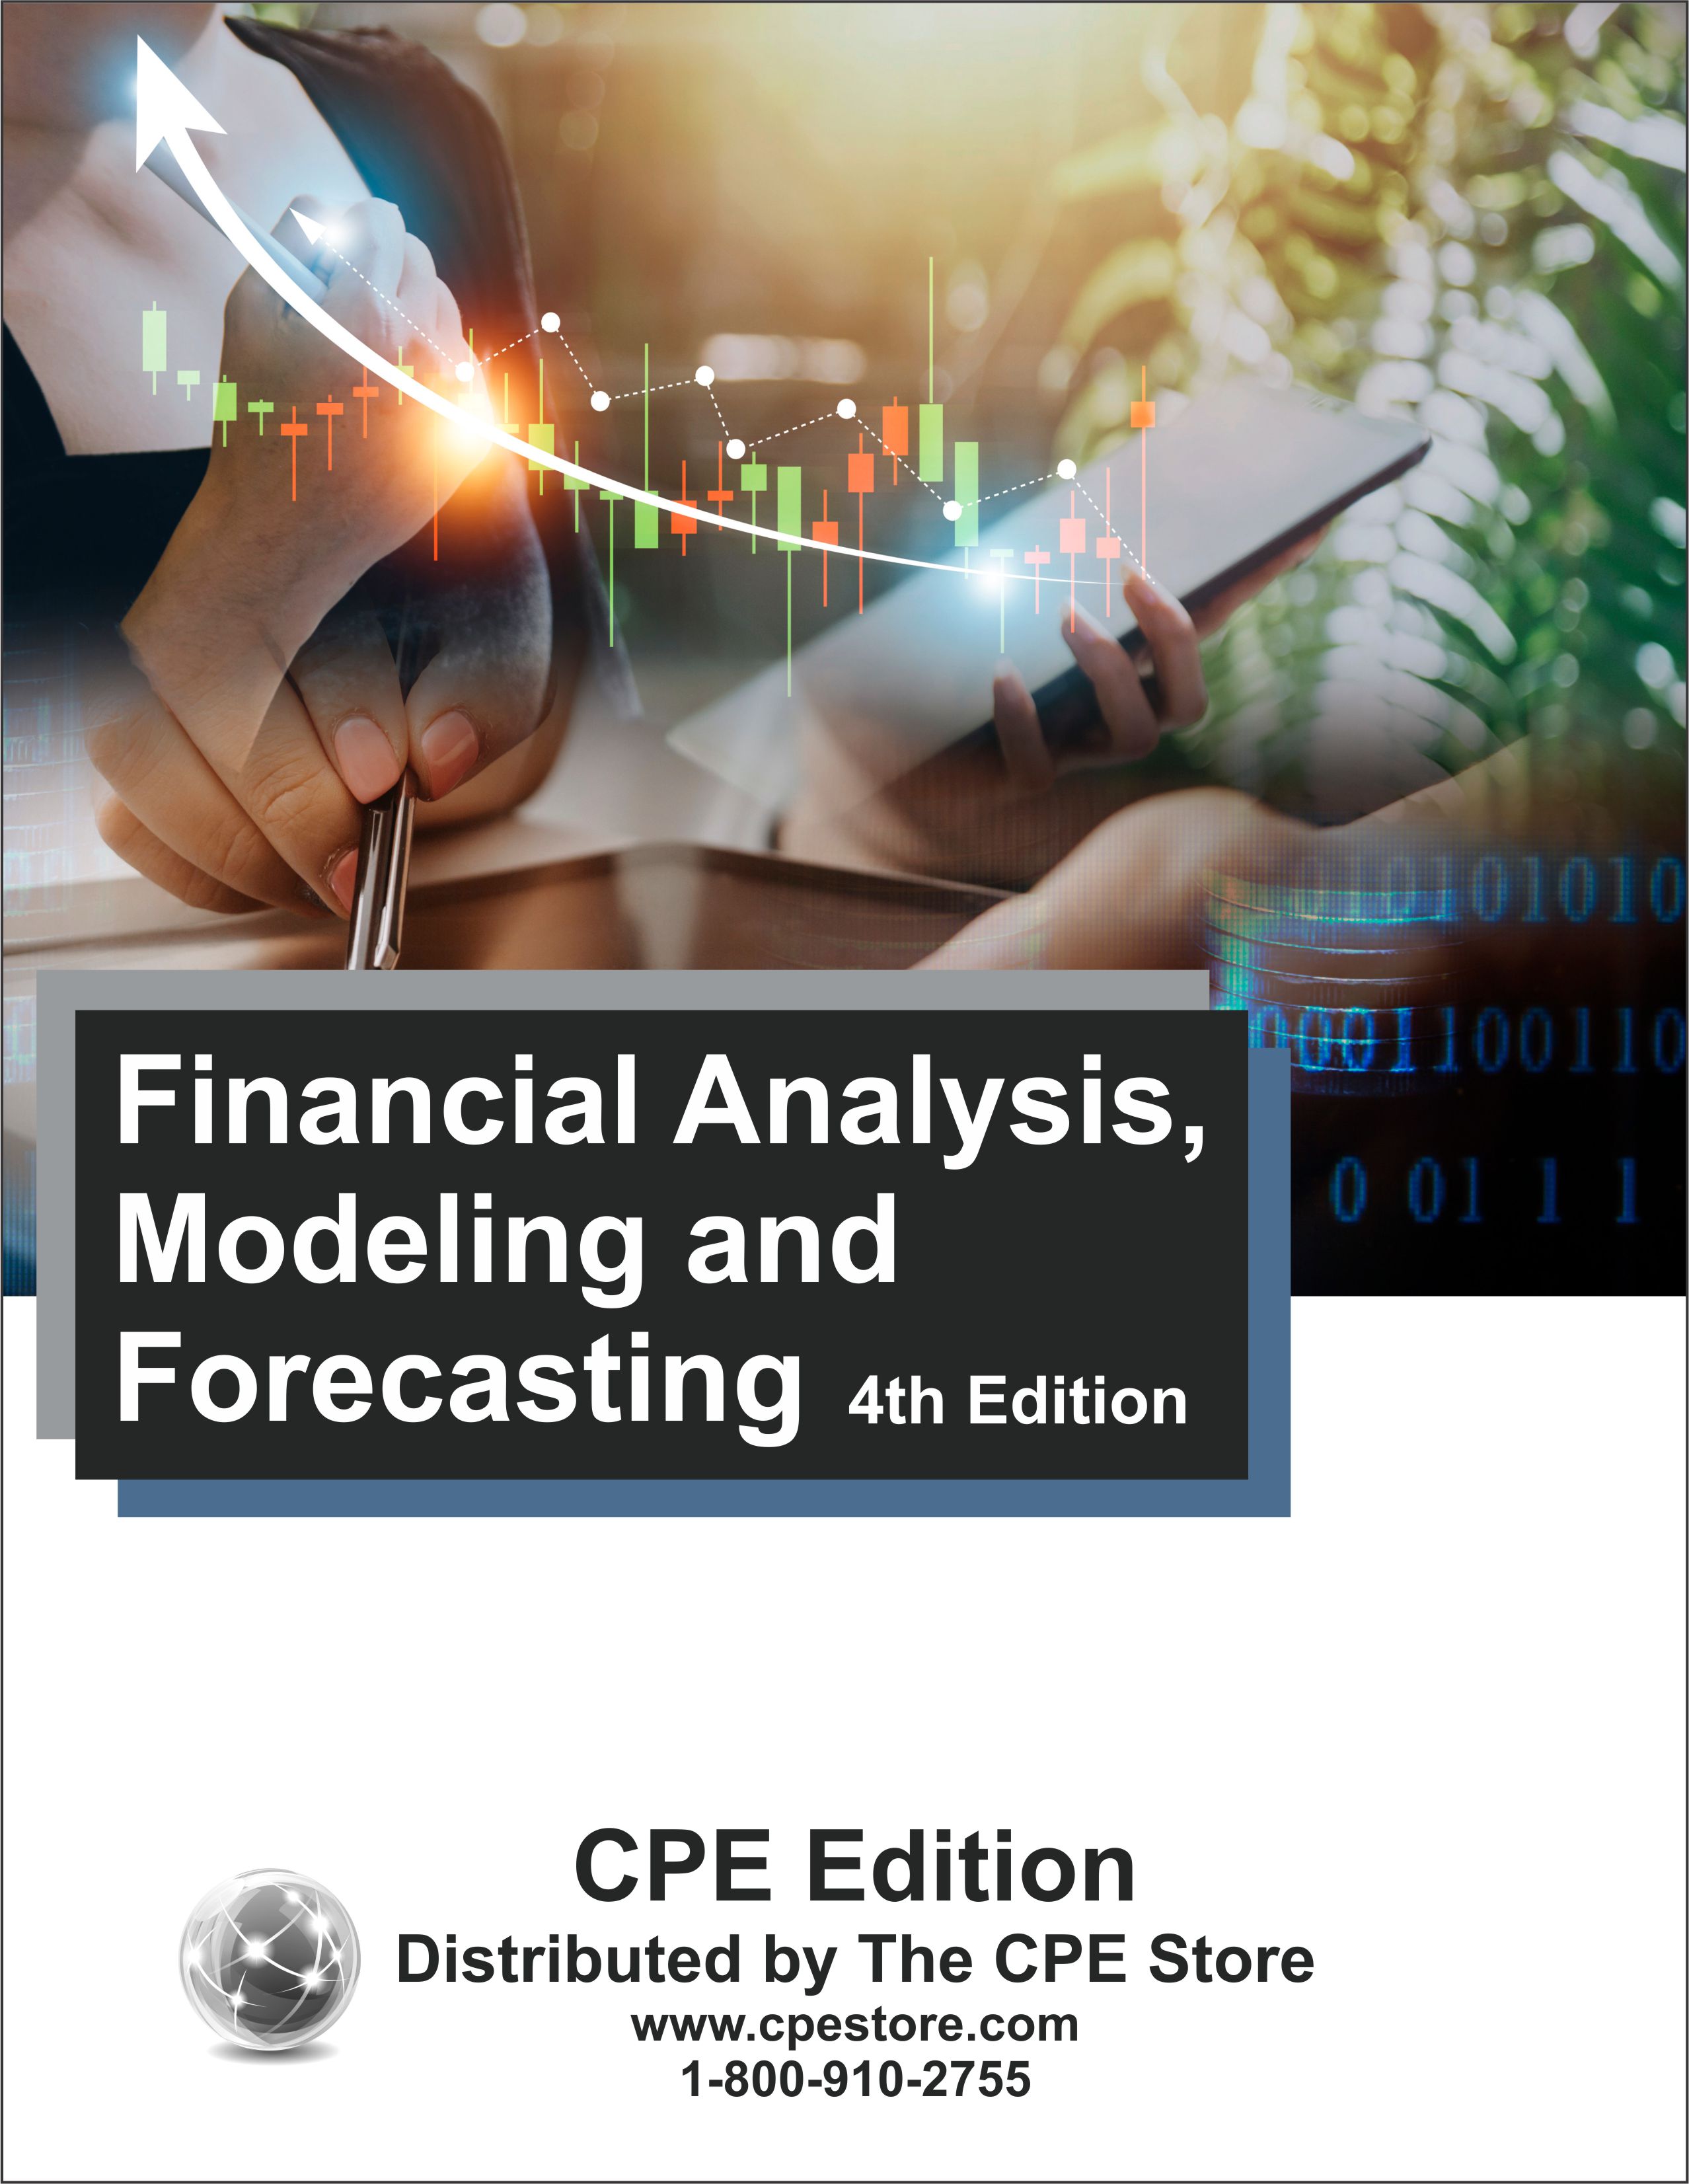 Financial Analysis, Modeling and Forecasting